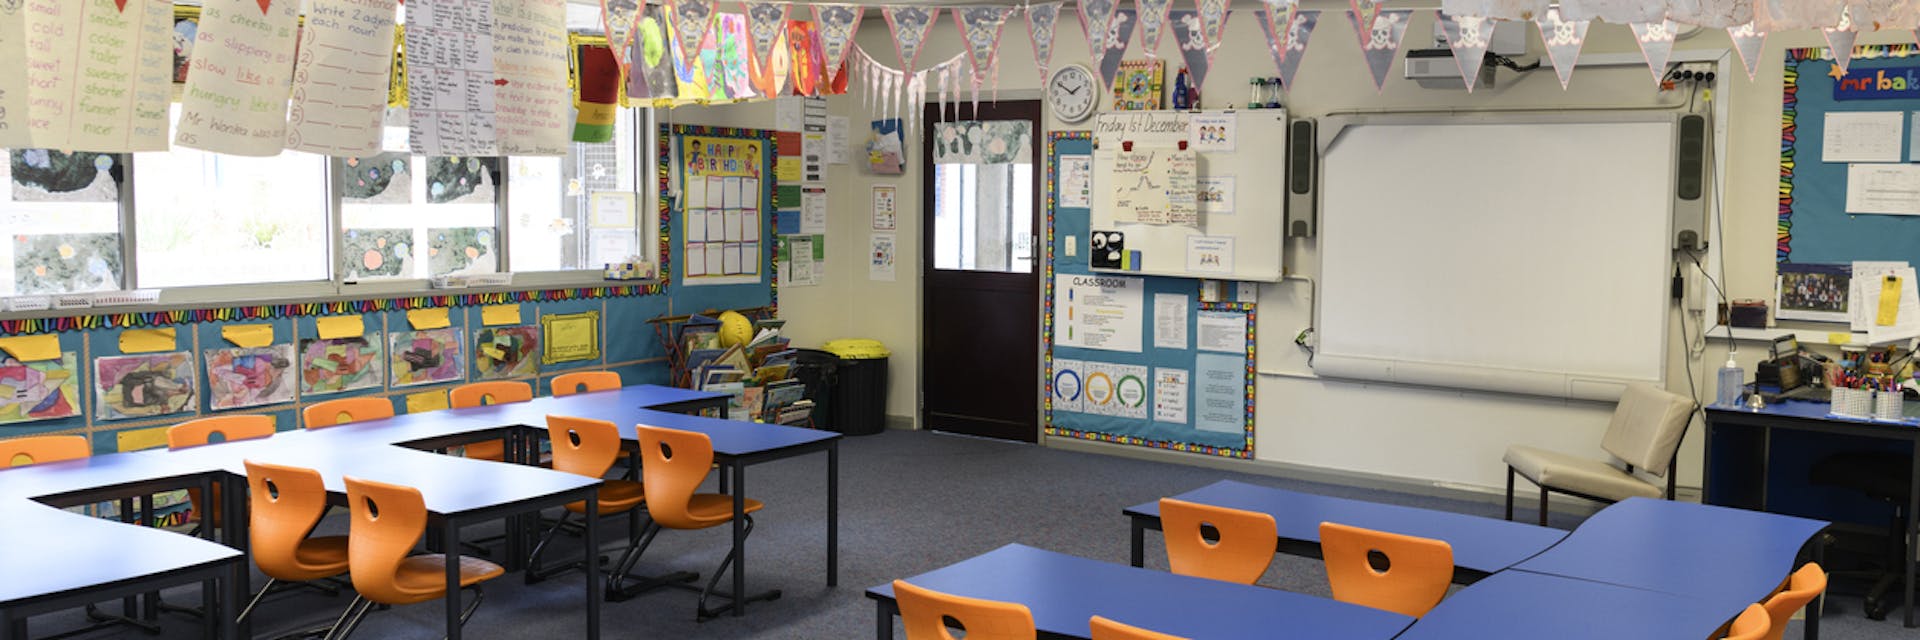 Guide on Classroom Design and Layout - Education Corner